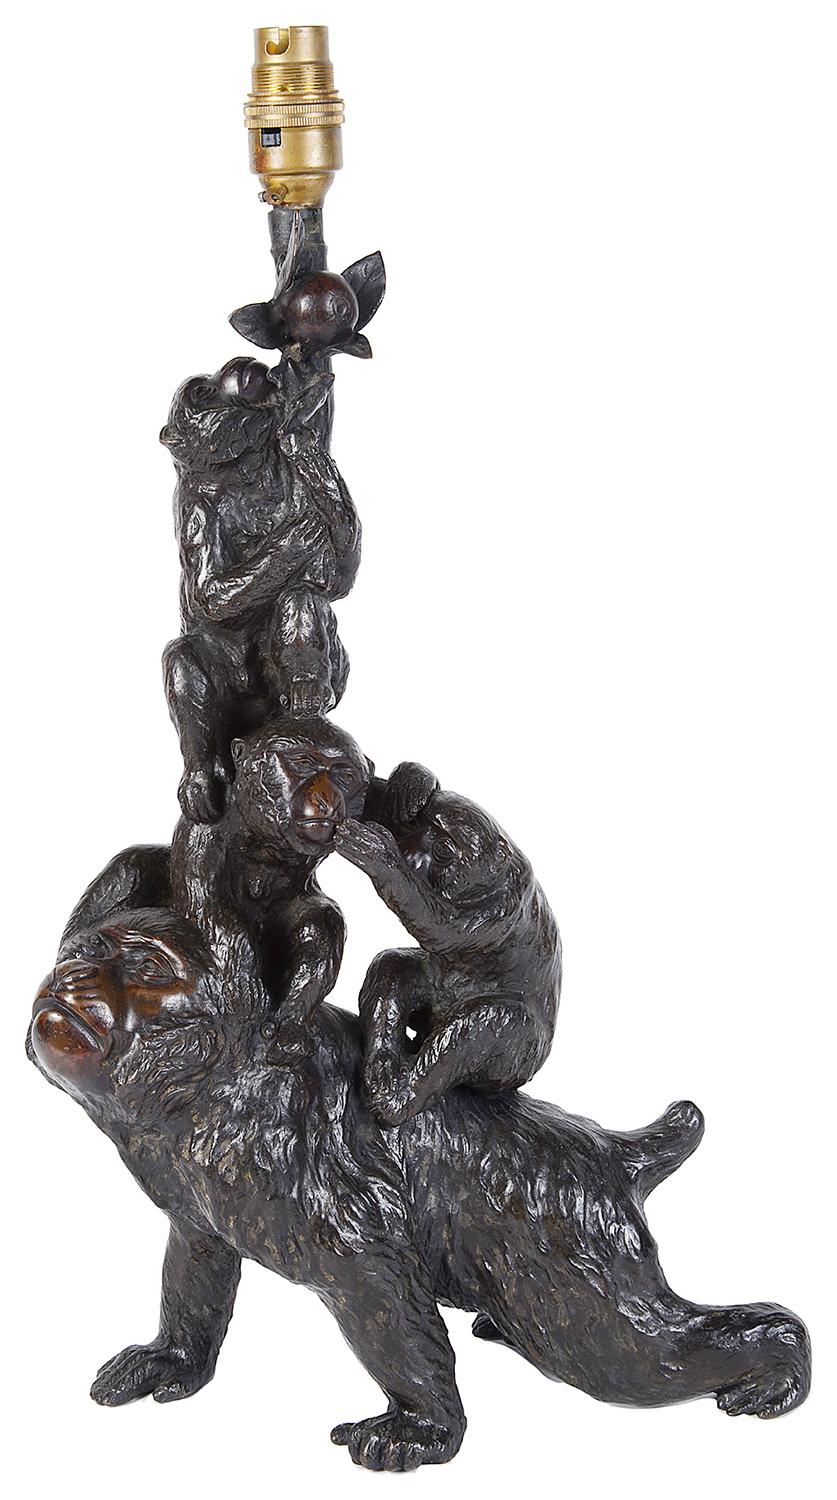 A fine quality Meiji period (1868-1912) bronze study of Monkeys playing.
Converted to a lamp.